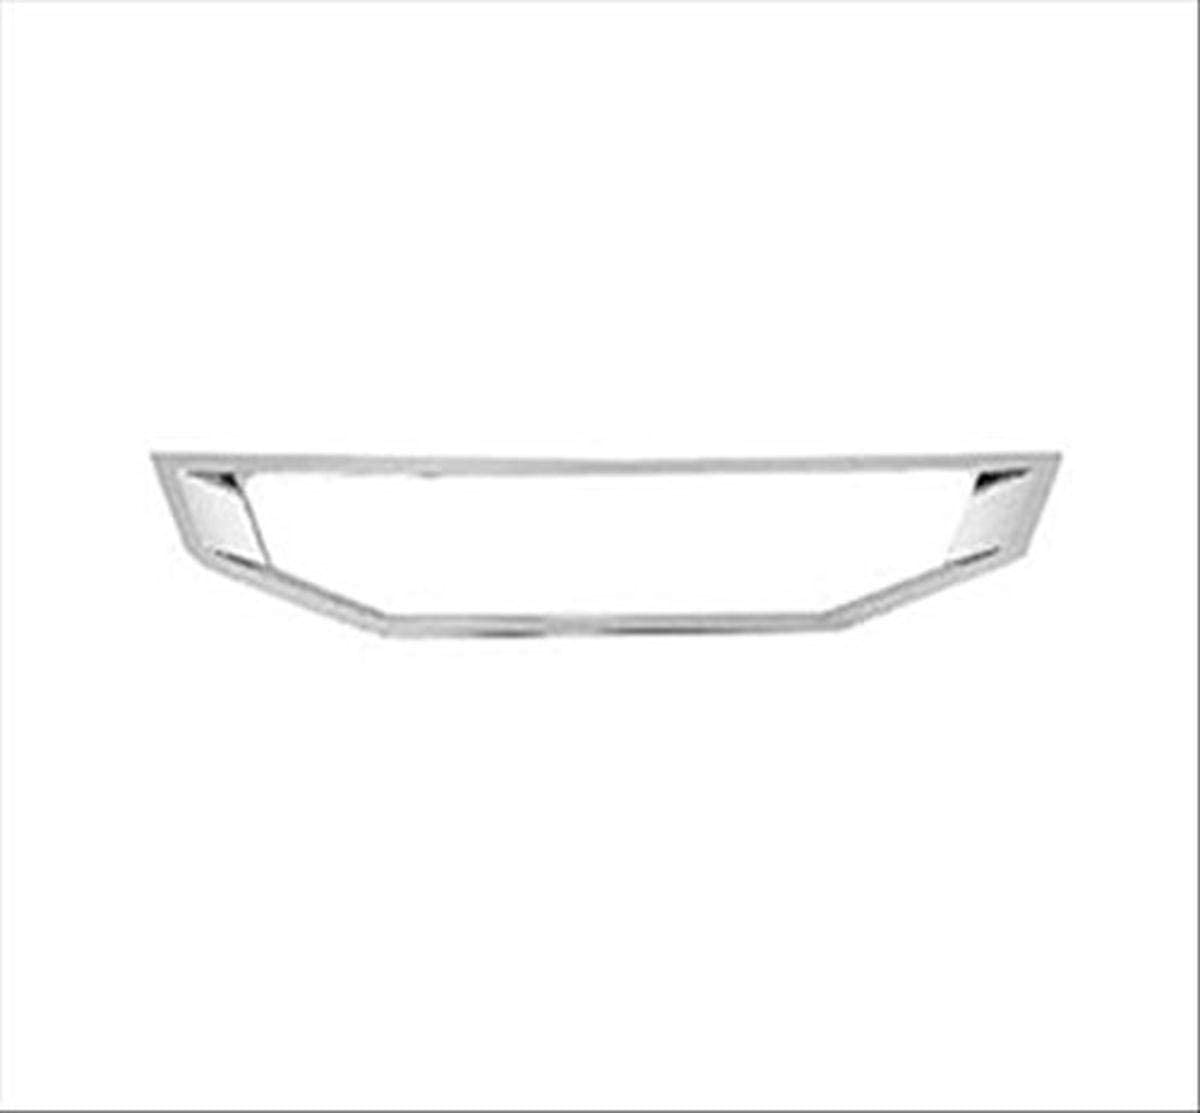 Sherman Replacement Part Compatible with Honda Accord Grille Molding (Partslink Number HO1210123)